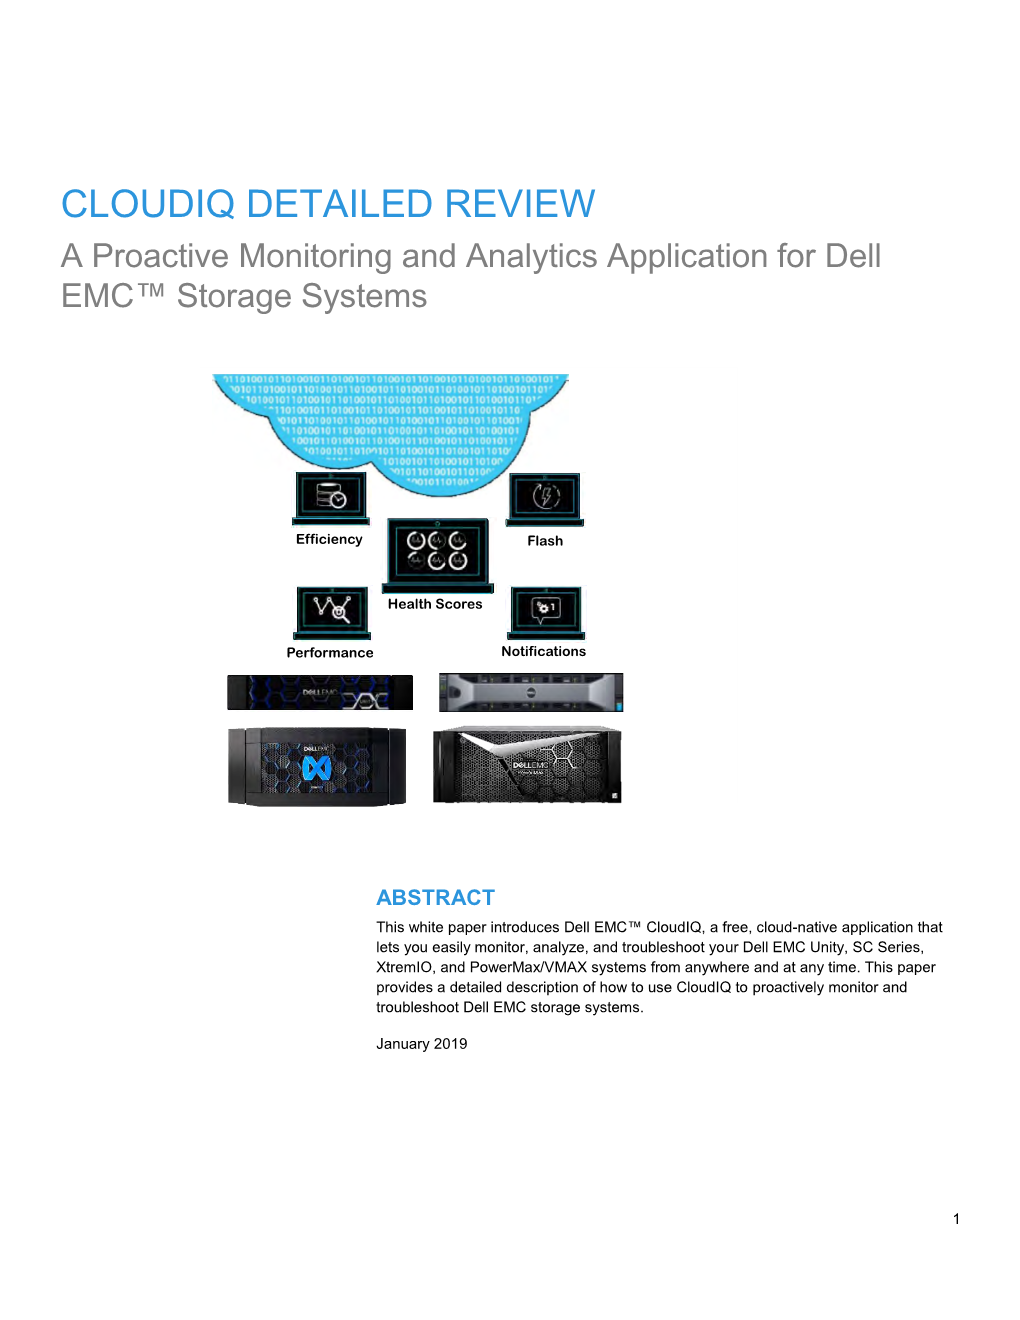 CLOUDIQ DETAILED REVIEW a Proactive Monitoring and Analytics Application for Dell EMC™ Storage Systems